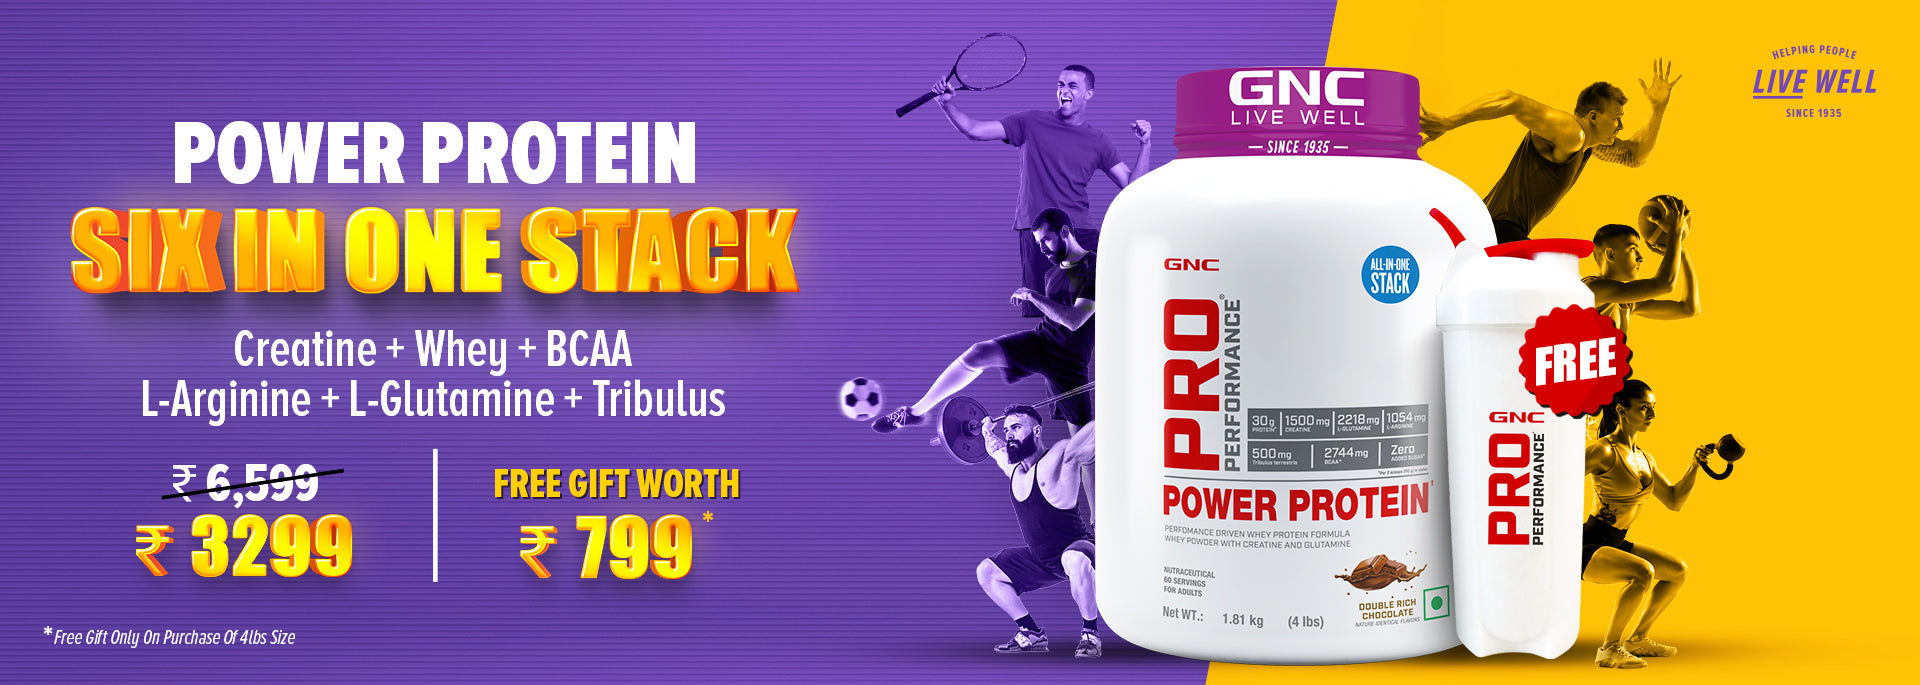 GNC Pro Performance Power Protein - 6-in-1 Stack for Increased Strength, Recovery & Muscle Mass